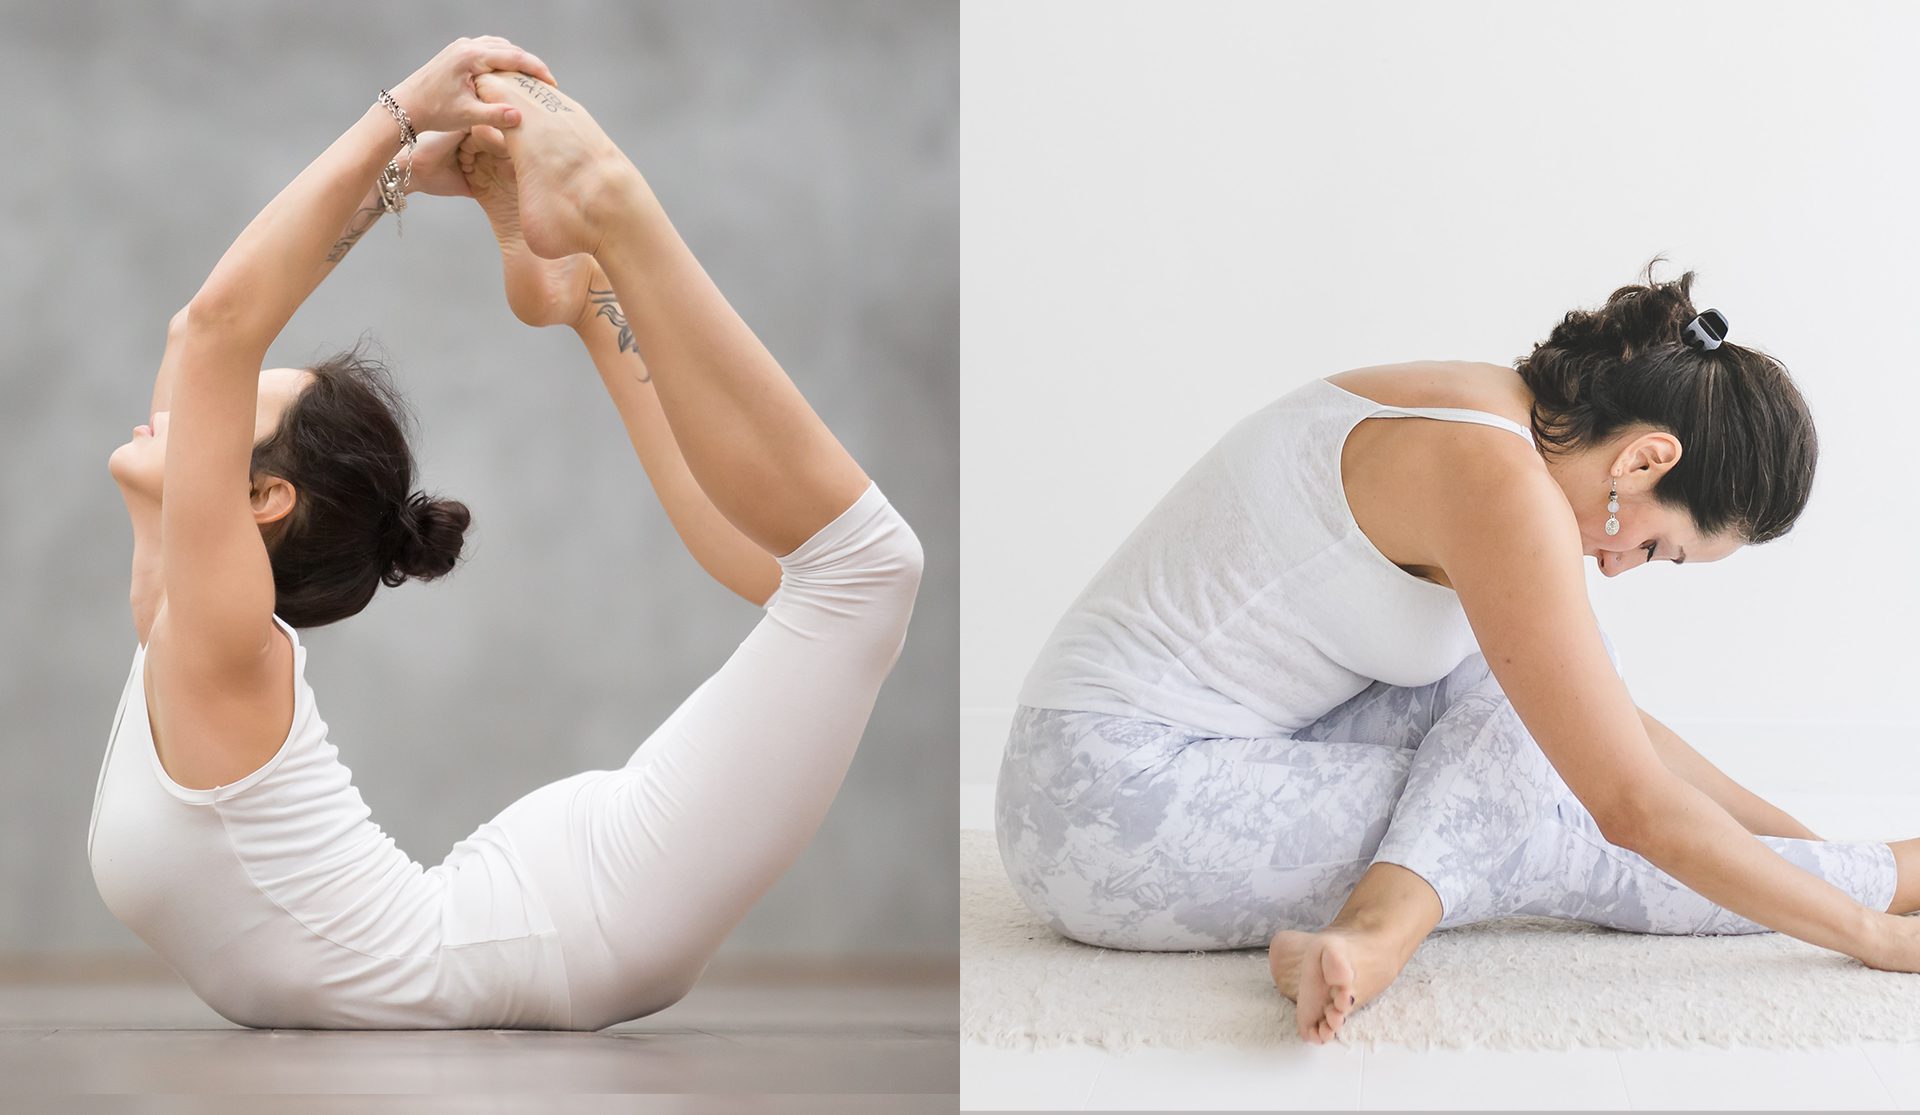 3 yoga poses for balance and strength - The Yoga Institute Goa